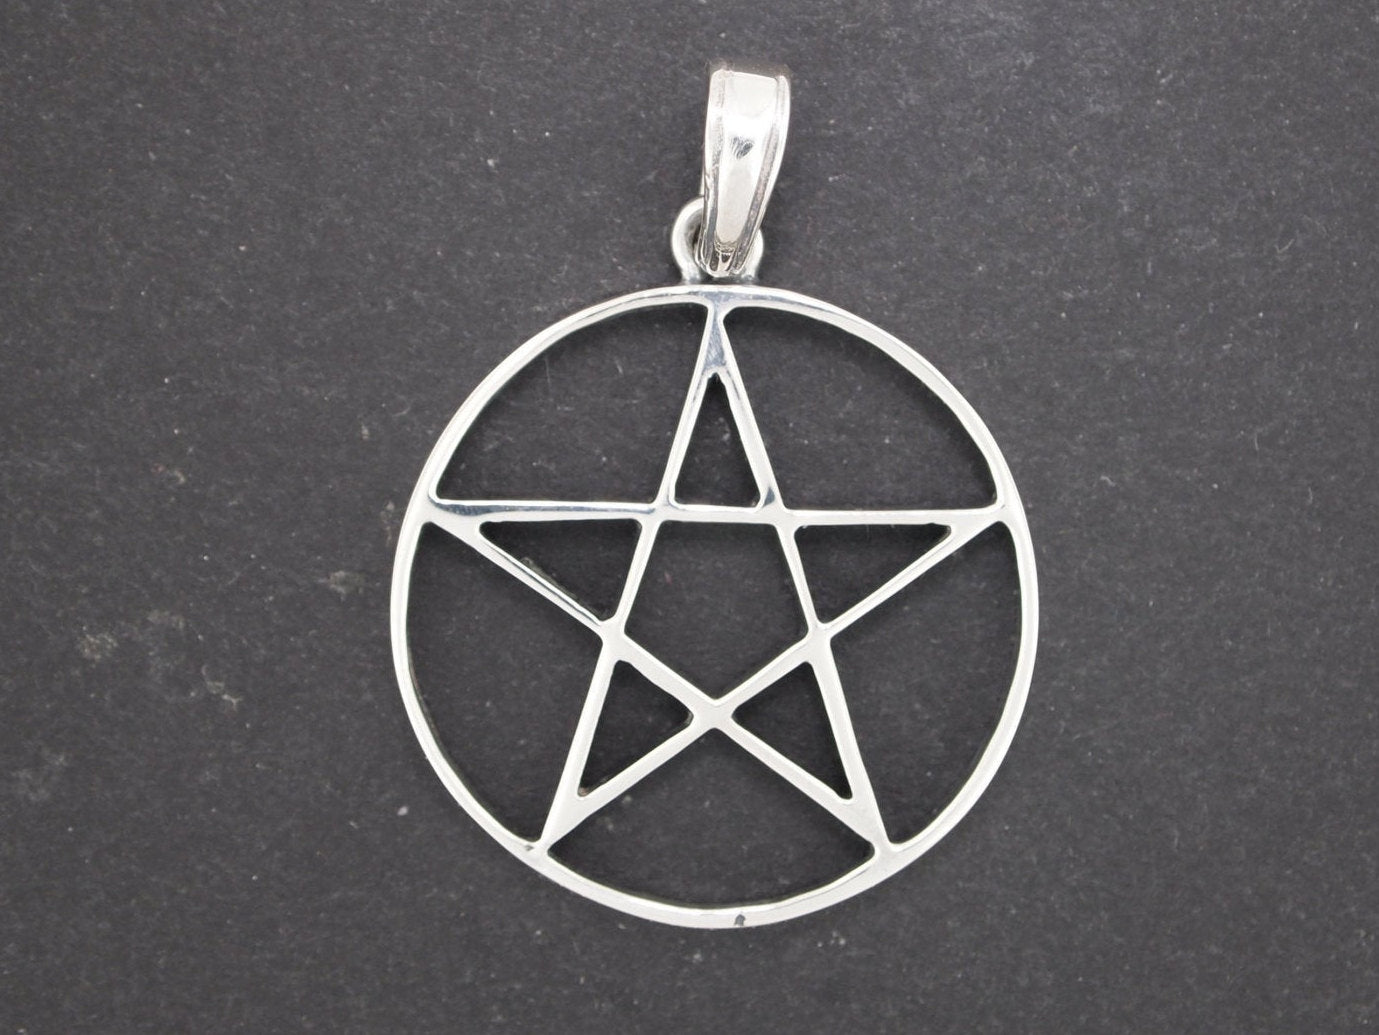 Large Pentacle Pendant in 925 Silver or Bronze, Pentacle Charm Jewelry, Witches Star Pendant Necklace, Jewellery Gift for Wicca Pagan, Sterling Silver Pentacle Pendant, Silver Pentacle Charm, Large Silver Pentacle Pendant, Pagan Pentacle Charm